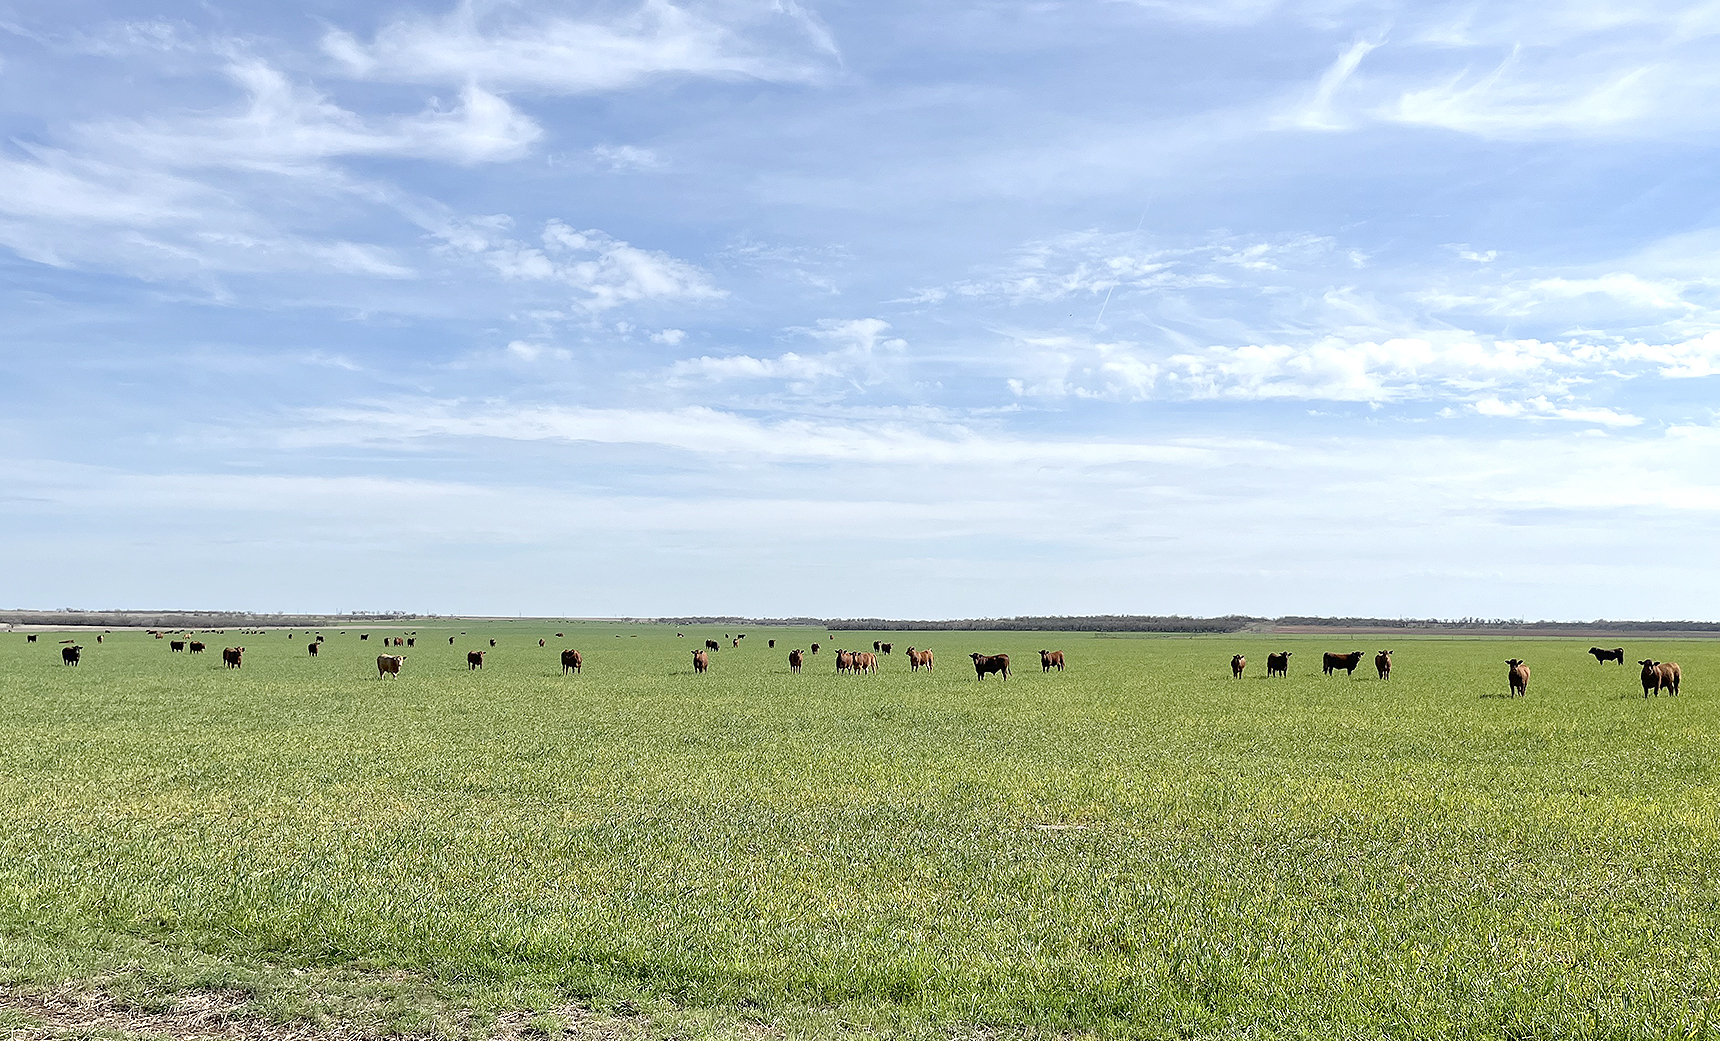 NEAR ANSON in North Central Texas, the area is often referred to as the Big Country, with open spaces stretching to the horizon. Such vistas can’t help but bring on pleasant thoughts and a diversion from the day-to-day grind.